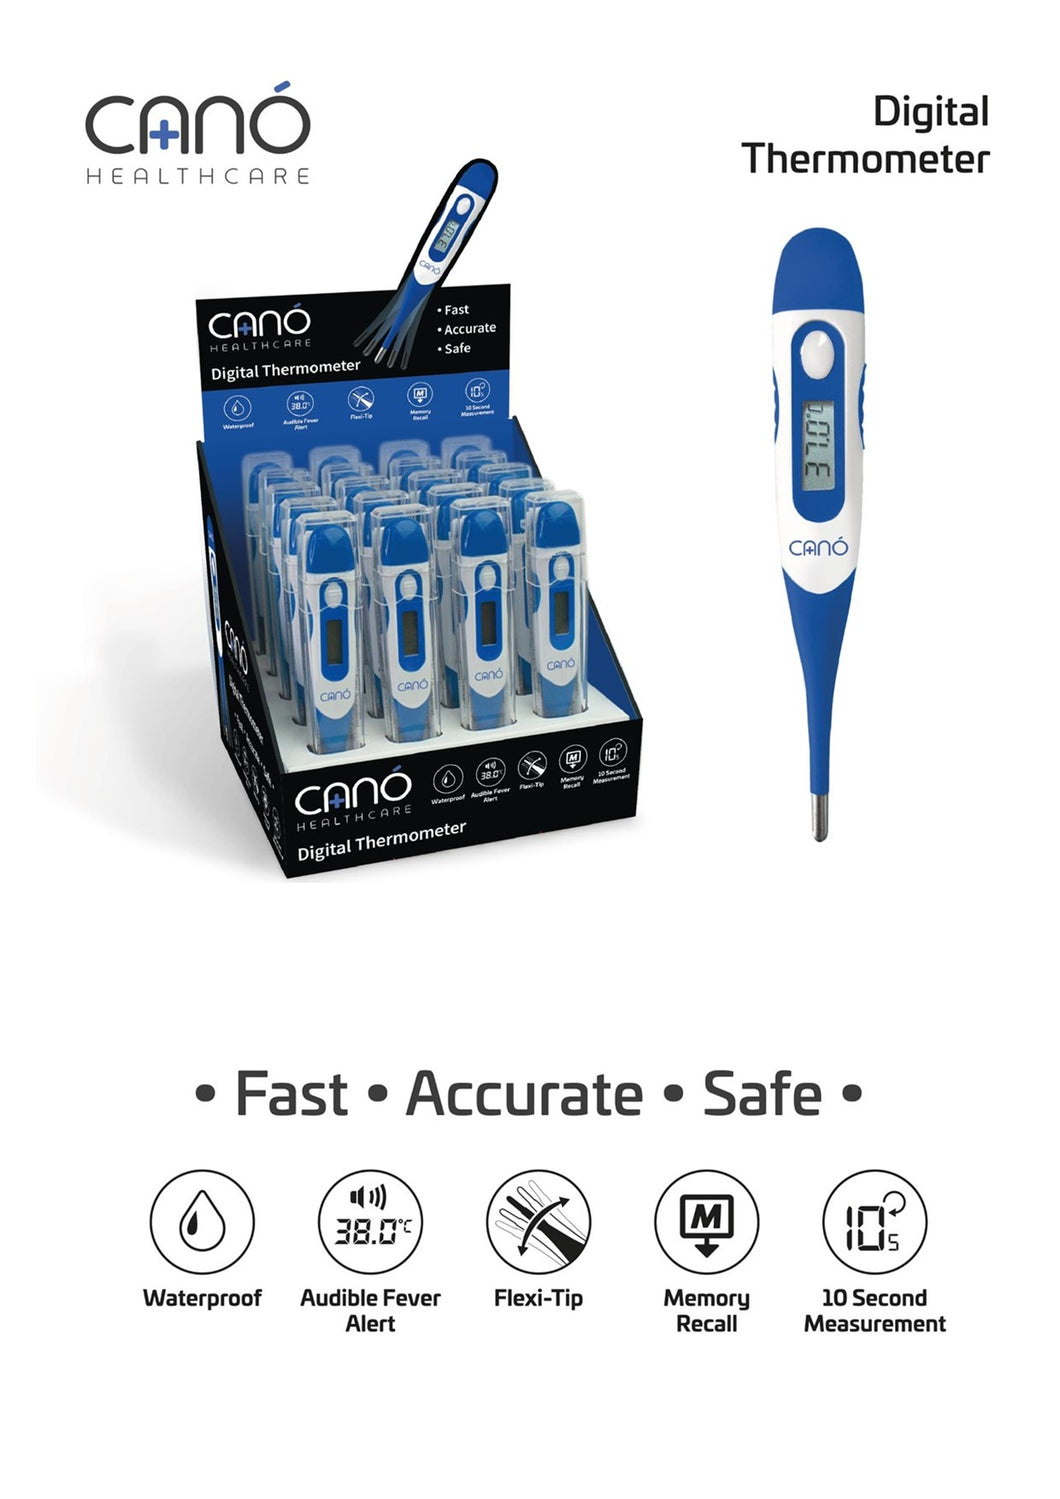 Cano Healthcare - Digital Thermometer Display of 20